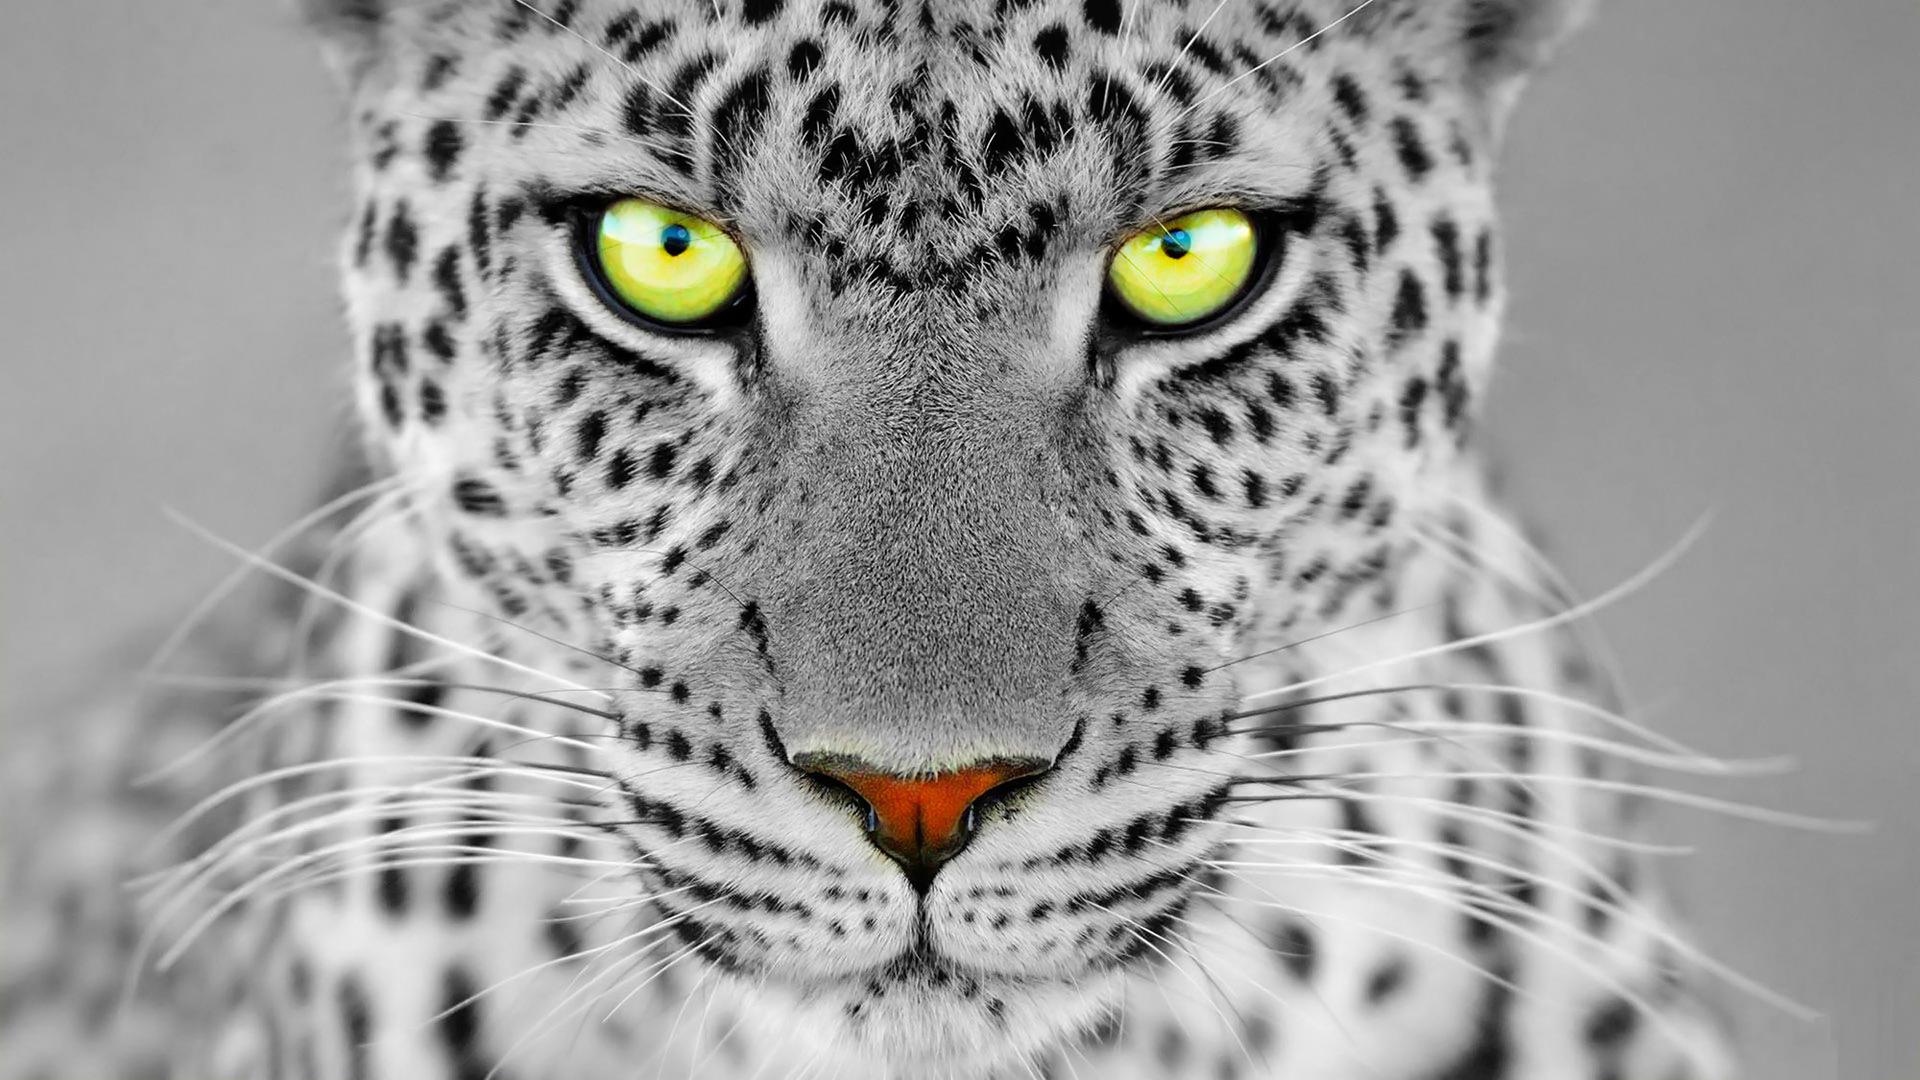 EYES OF A PANTHER WALLPAPER - (#131365) - HD Wallpapers ...